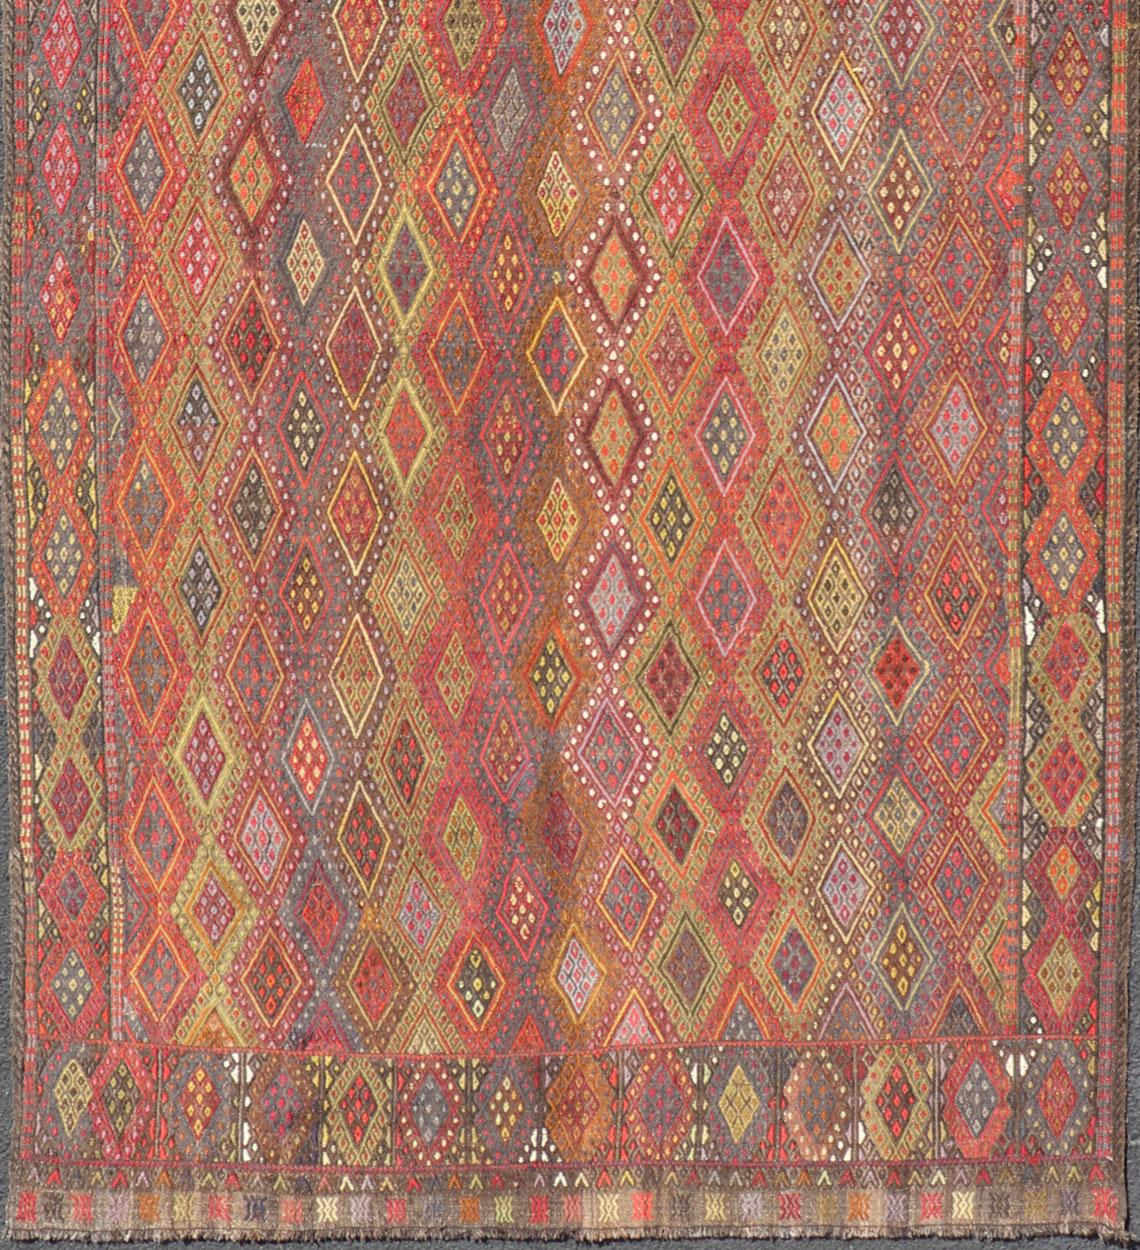 Vintage Turkish Gallery Kilim with All-Over Diamond Design in Multicolor. Vintage Turkish Gallery Kilim, Keivan Woven Arts / rug EN-P13788, country of origin / type: Turkey / Kilim, circa Mid-20th Century.
Measures: 5'0 x 13'0.
Woven during the